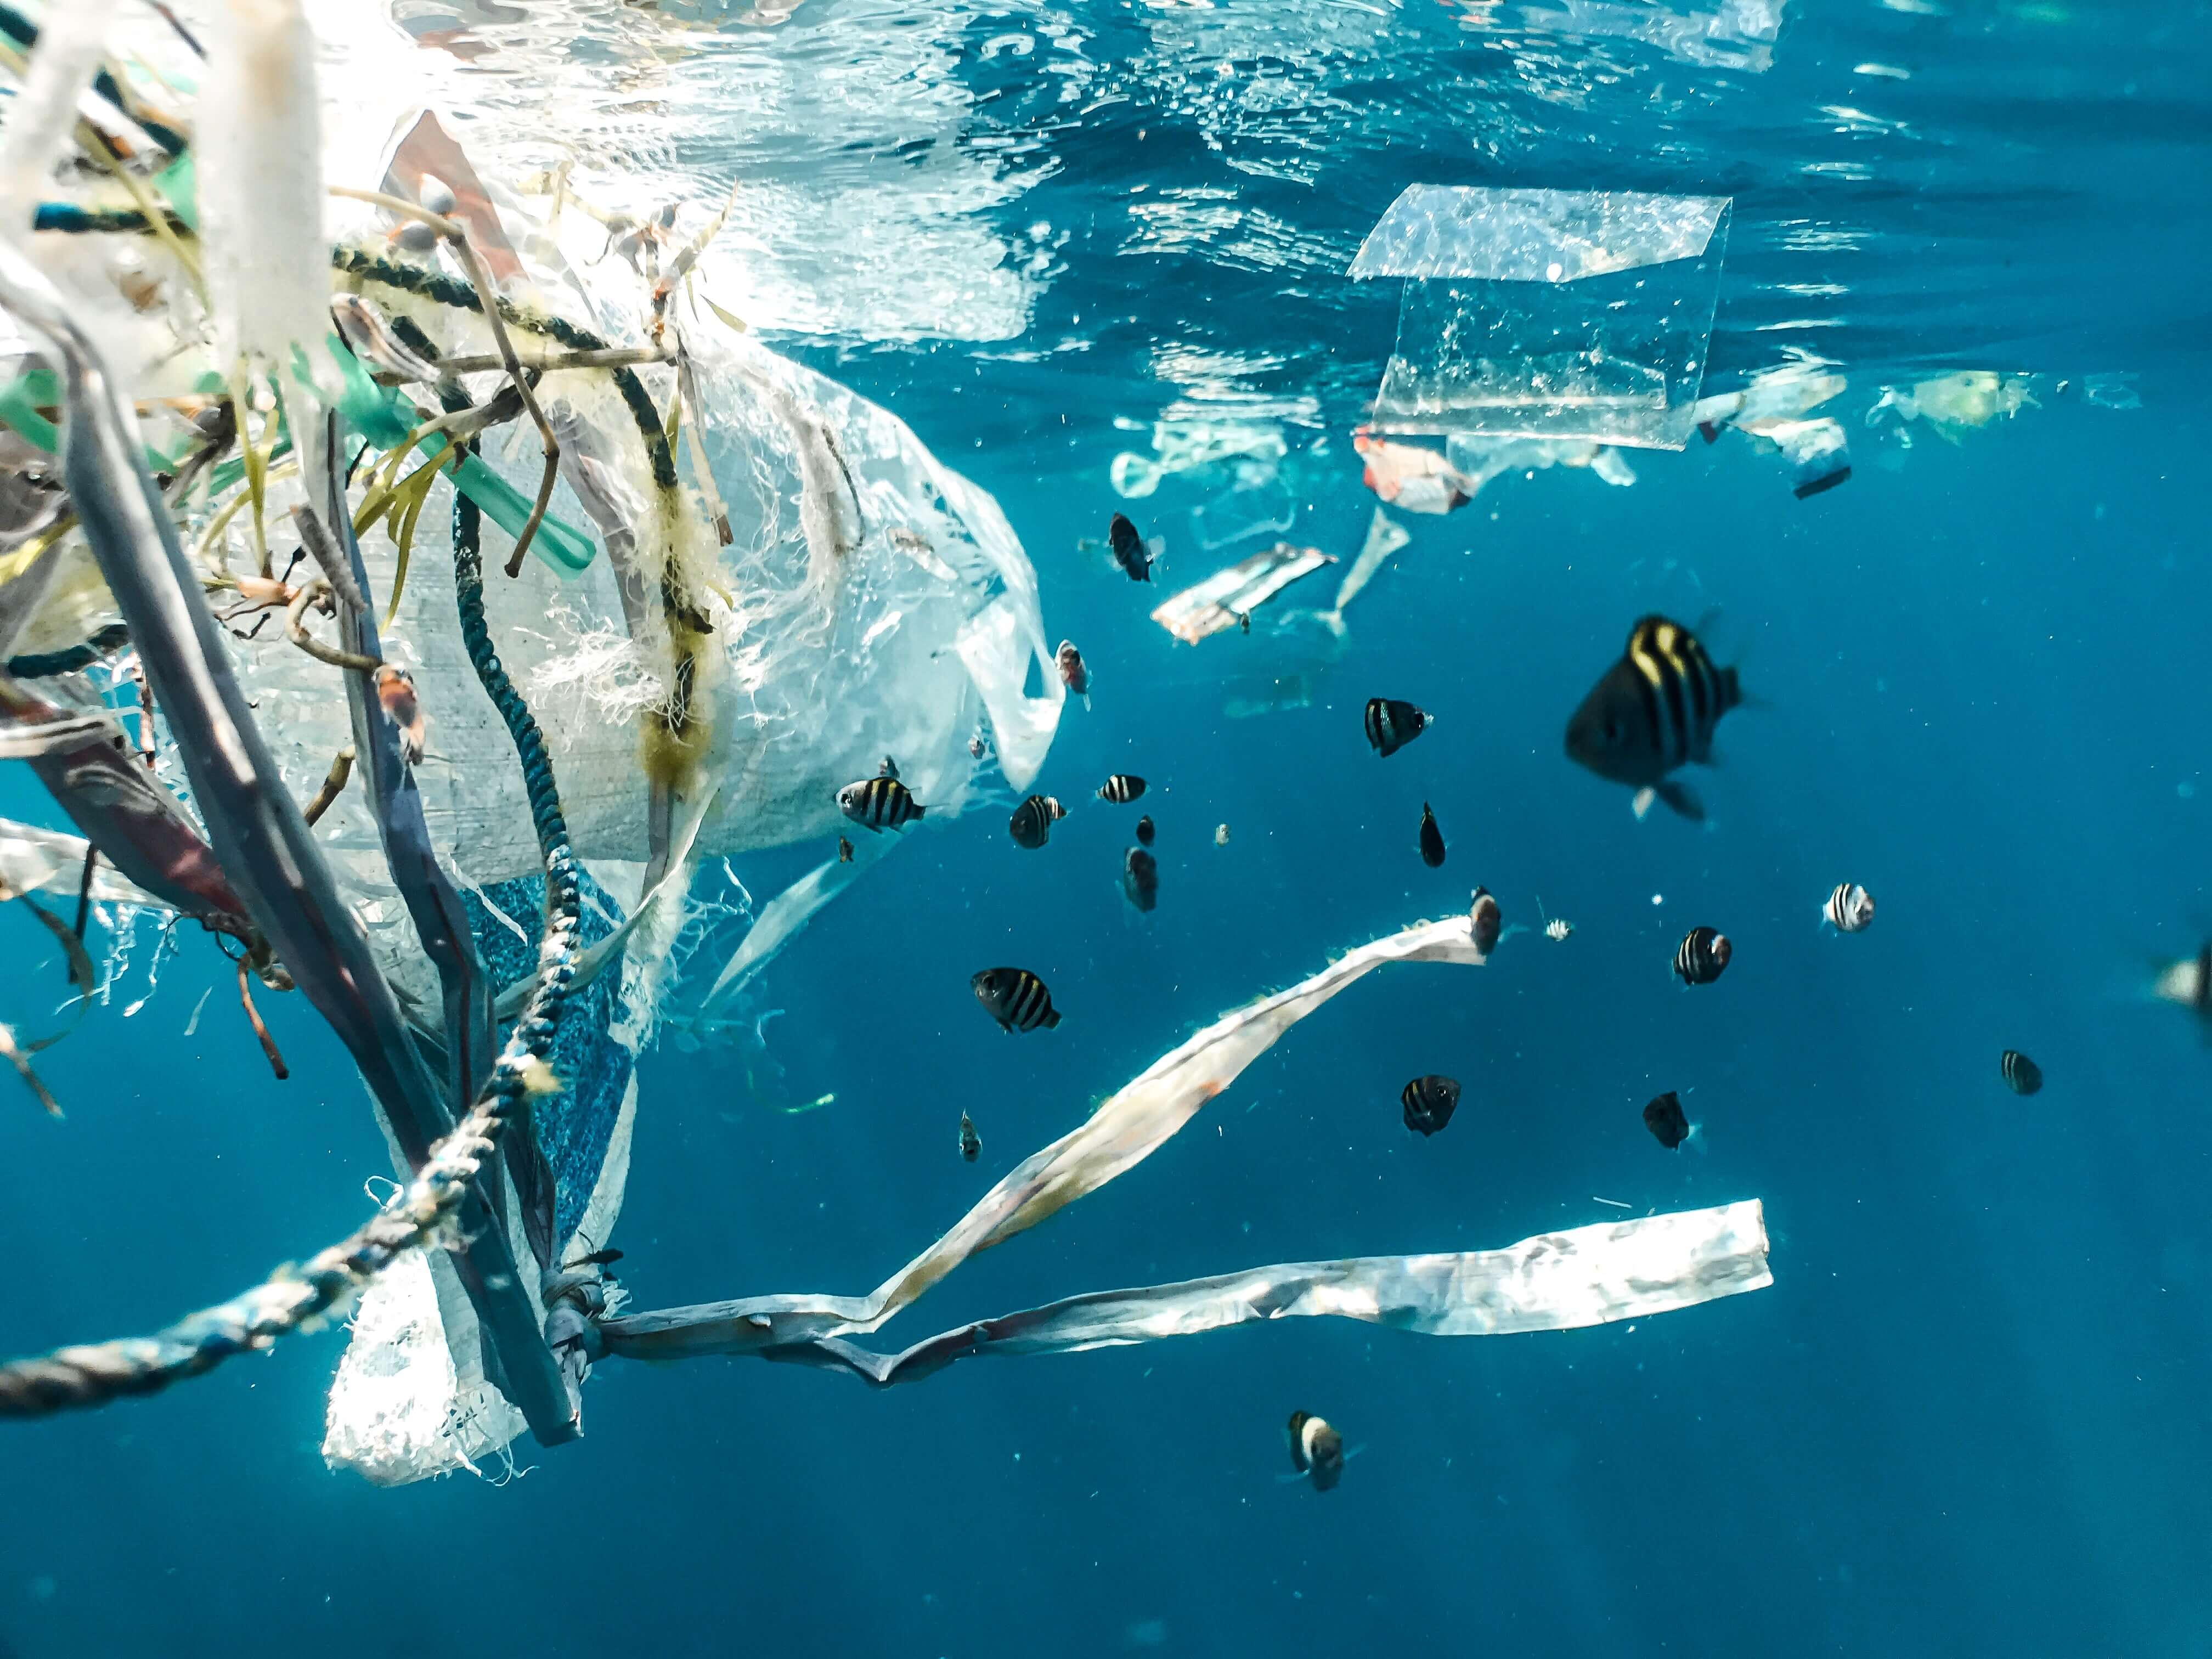 microplastic pollution mostly comes from textile fibers